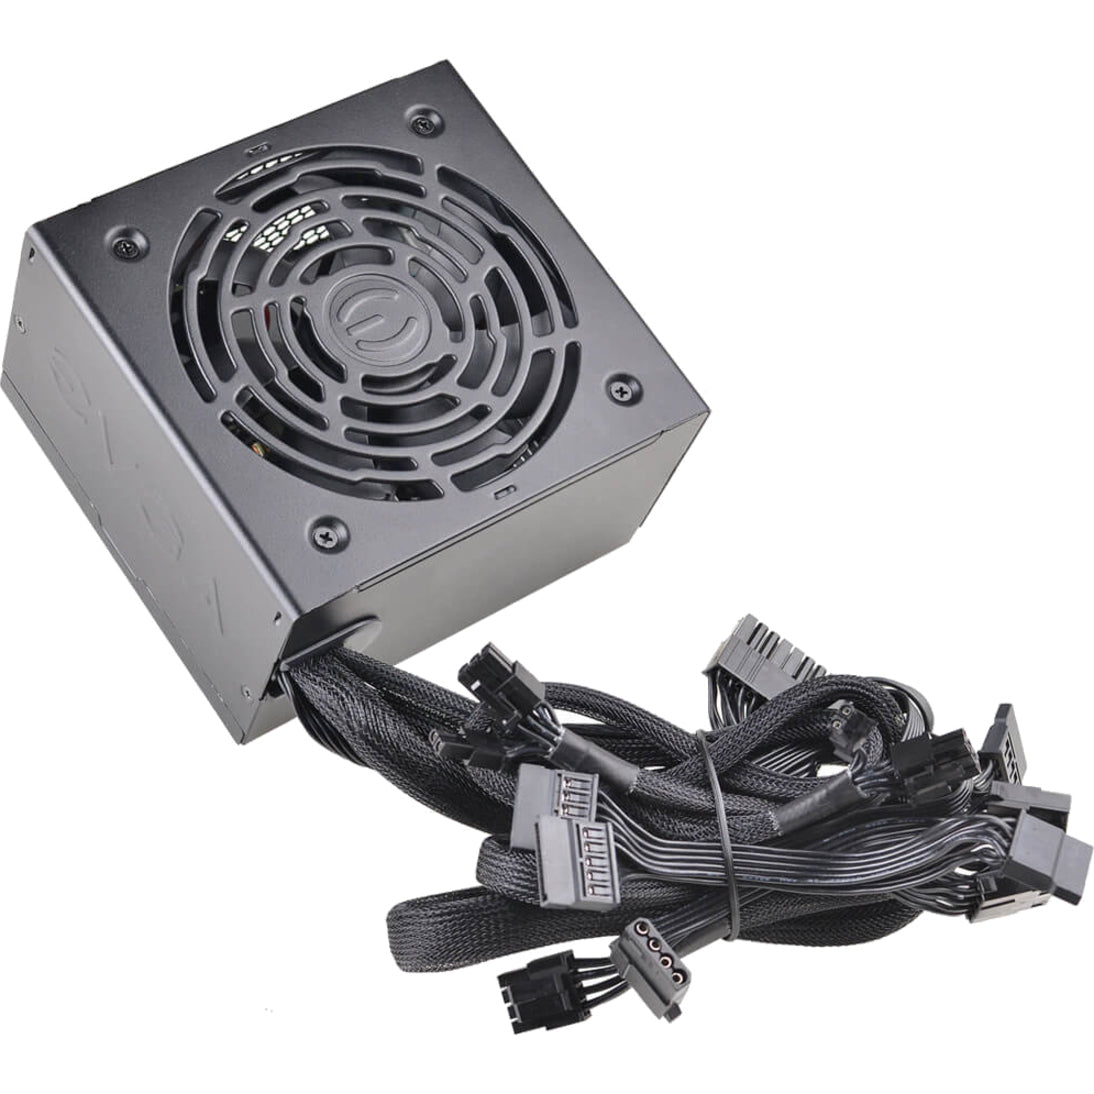 EVGA 100-BR-0500-K1 BR Power Supply, 500W, 85% Efficiency, NVIDIA SLI and ATI CrossFire Supported